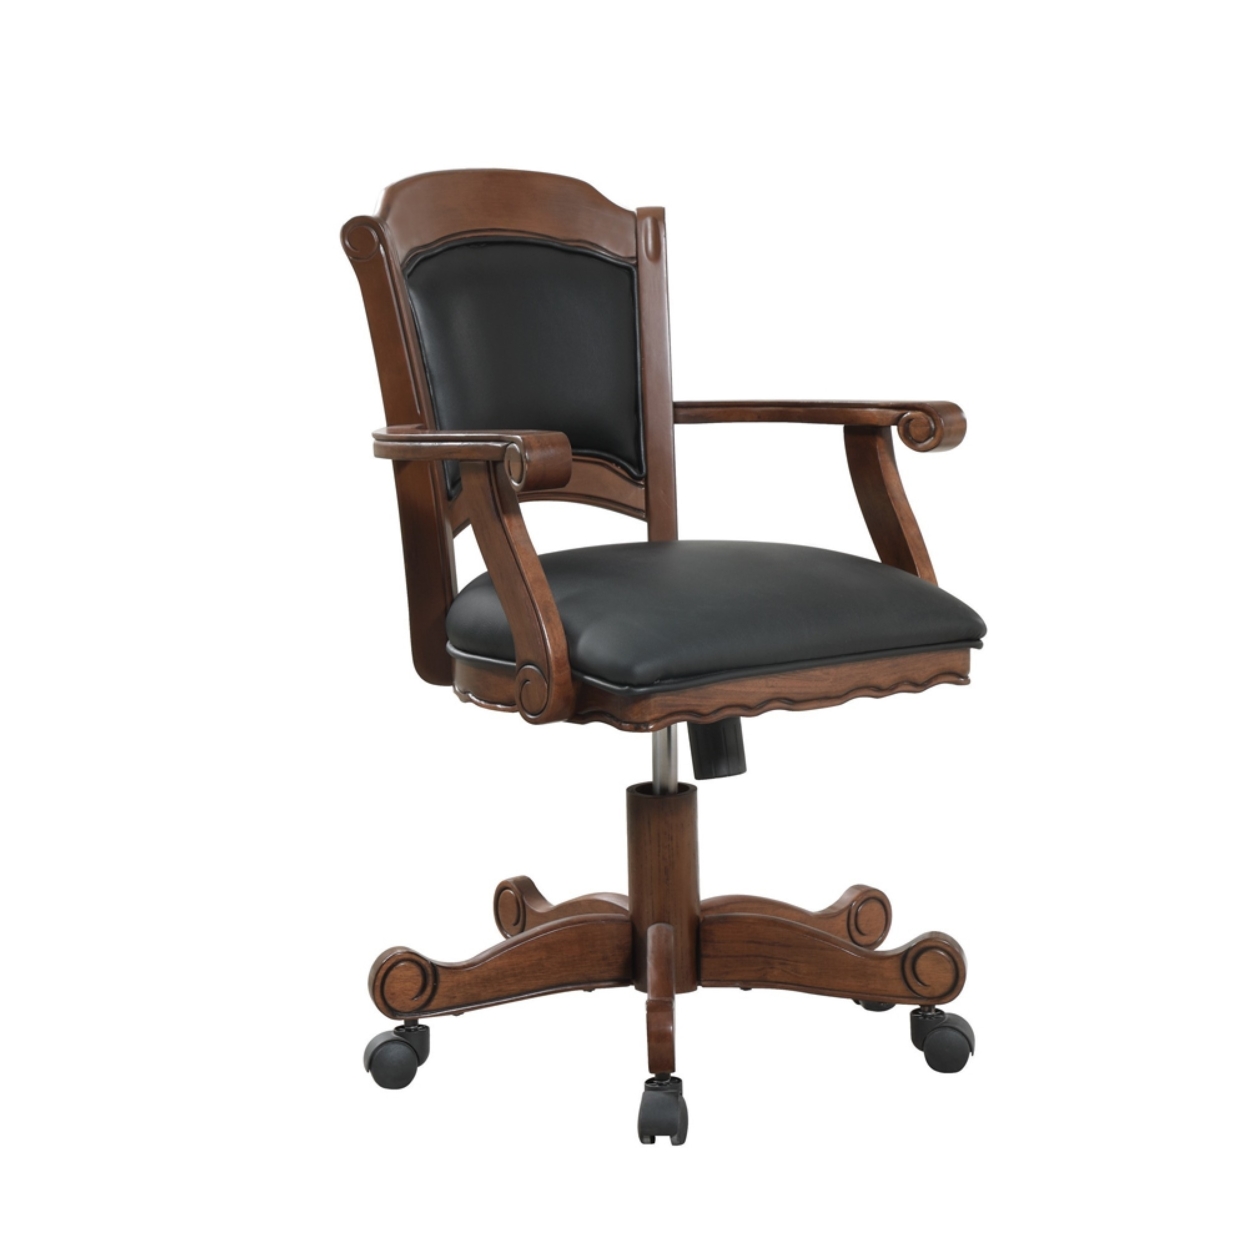 Snug Arm Game Chair With Casters And Fabric Seat And Back, Brown- Saltoro Sherpi